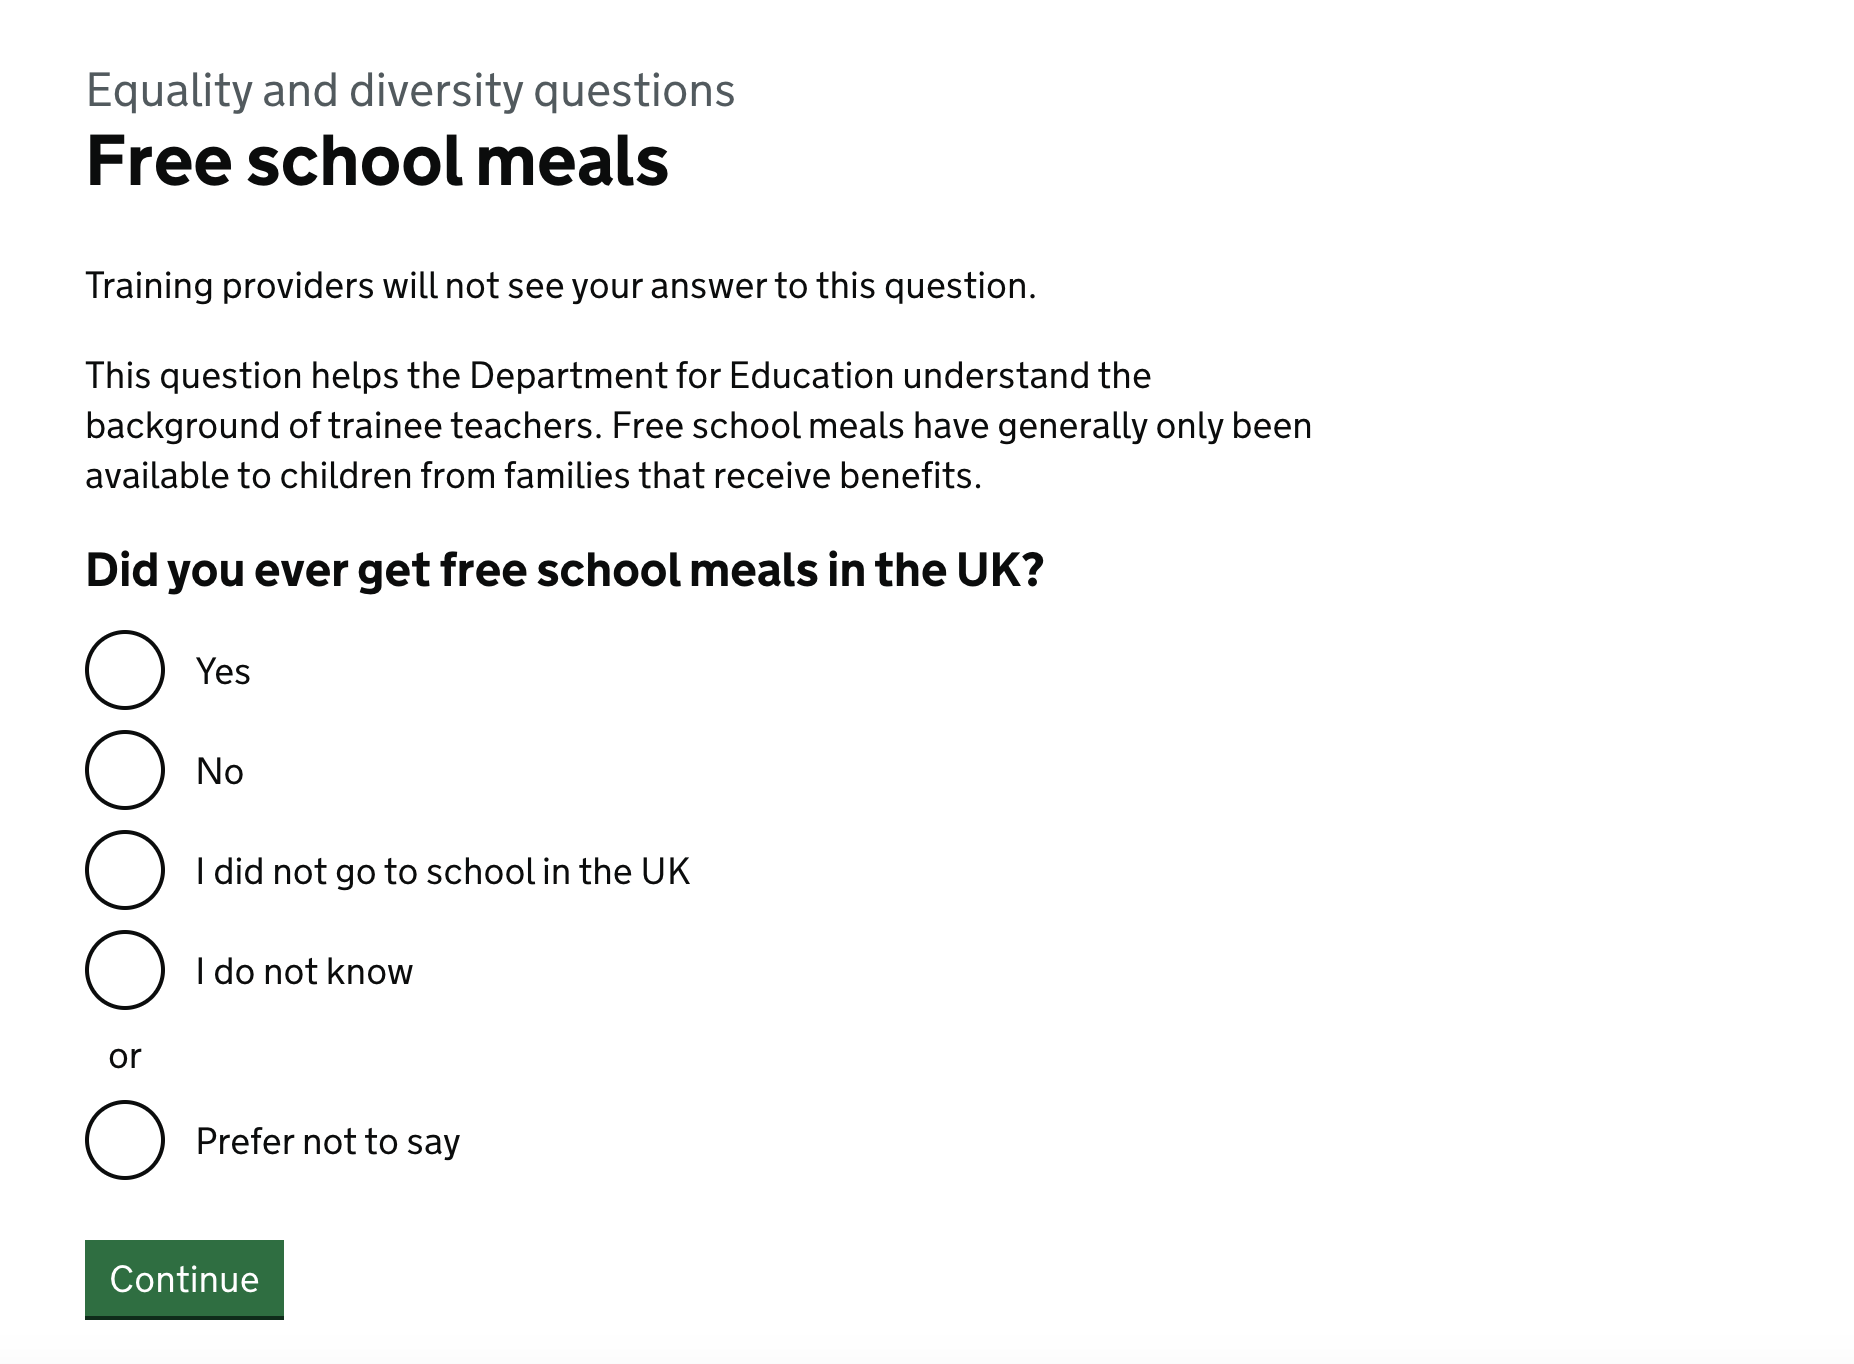 Screenshot showing a page with the title "Free school meals" followed by the text "Training providers will not see your answer to this question. This question helps the Department for Education understand the background of trainee teachers. Free school meals have generally only been available to children from families that receieve benefits." followed by the question "Did you ever get free school meals in the UK?" and 5 options: Yes, No, "I did not go to school in the UK", "I do not know" and "Prefer not to say".